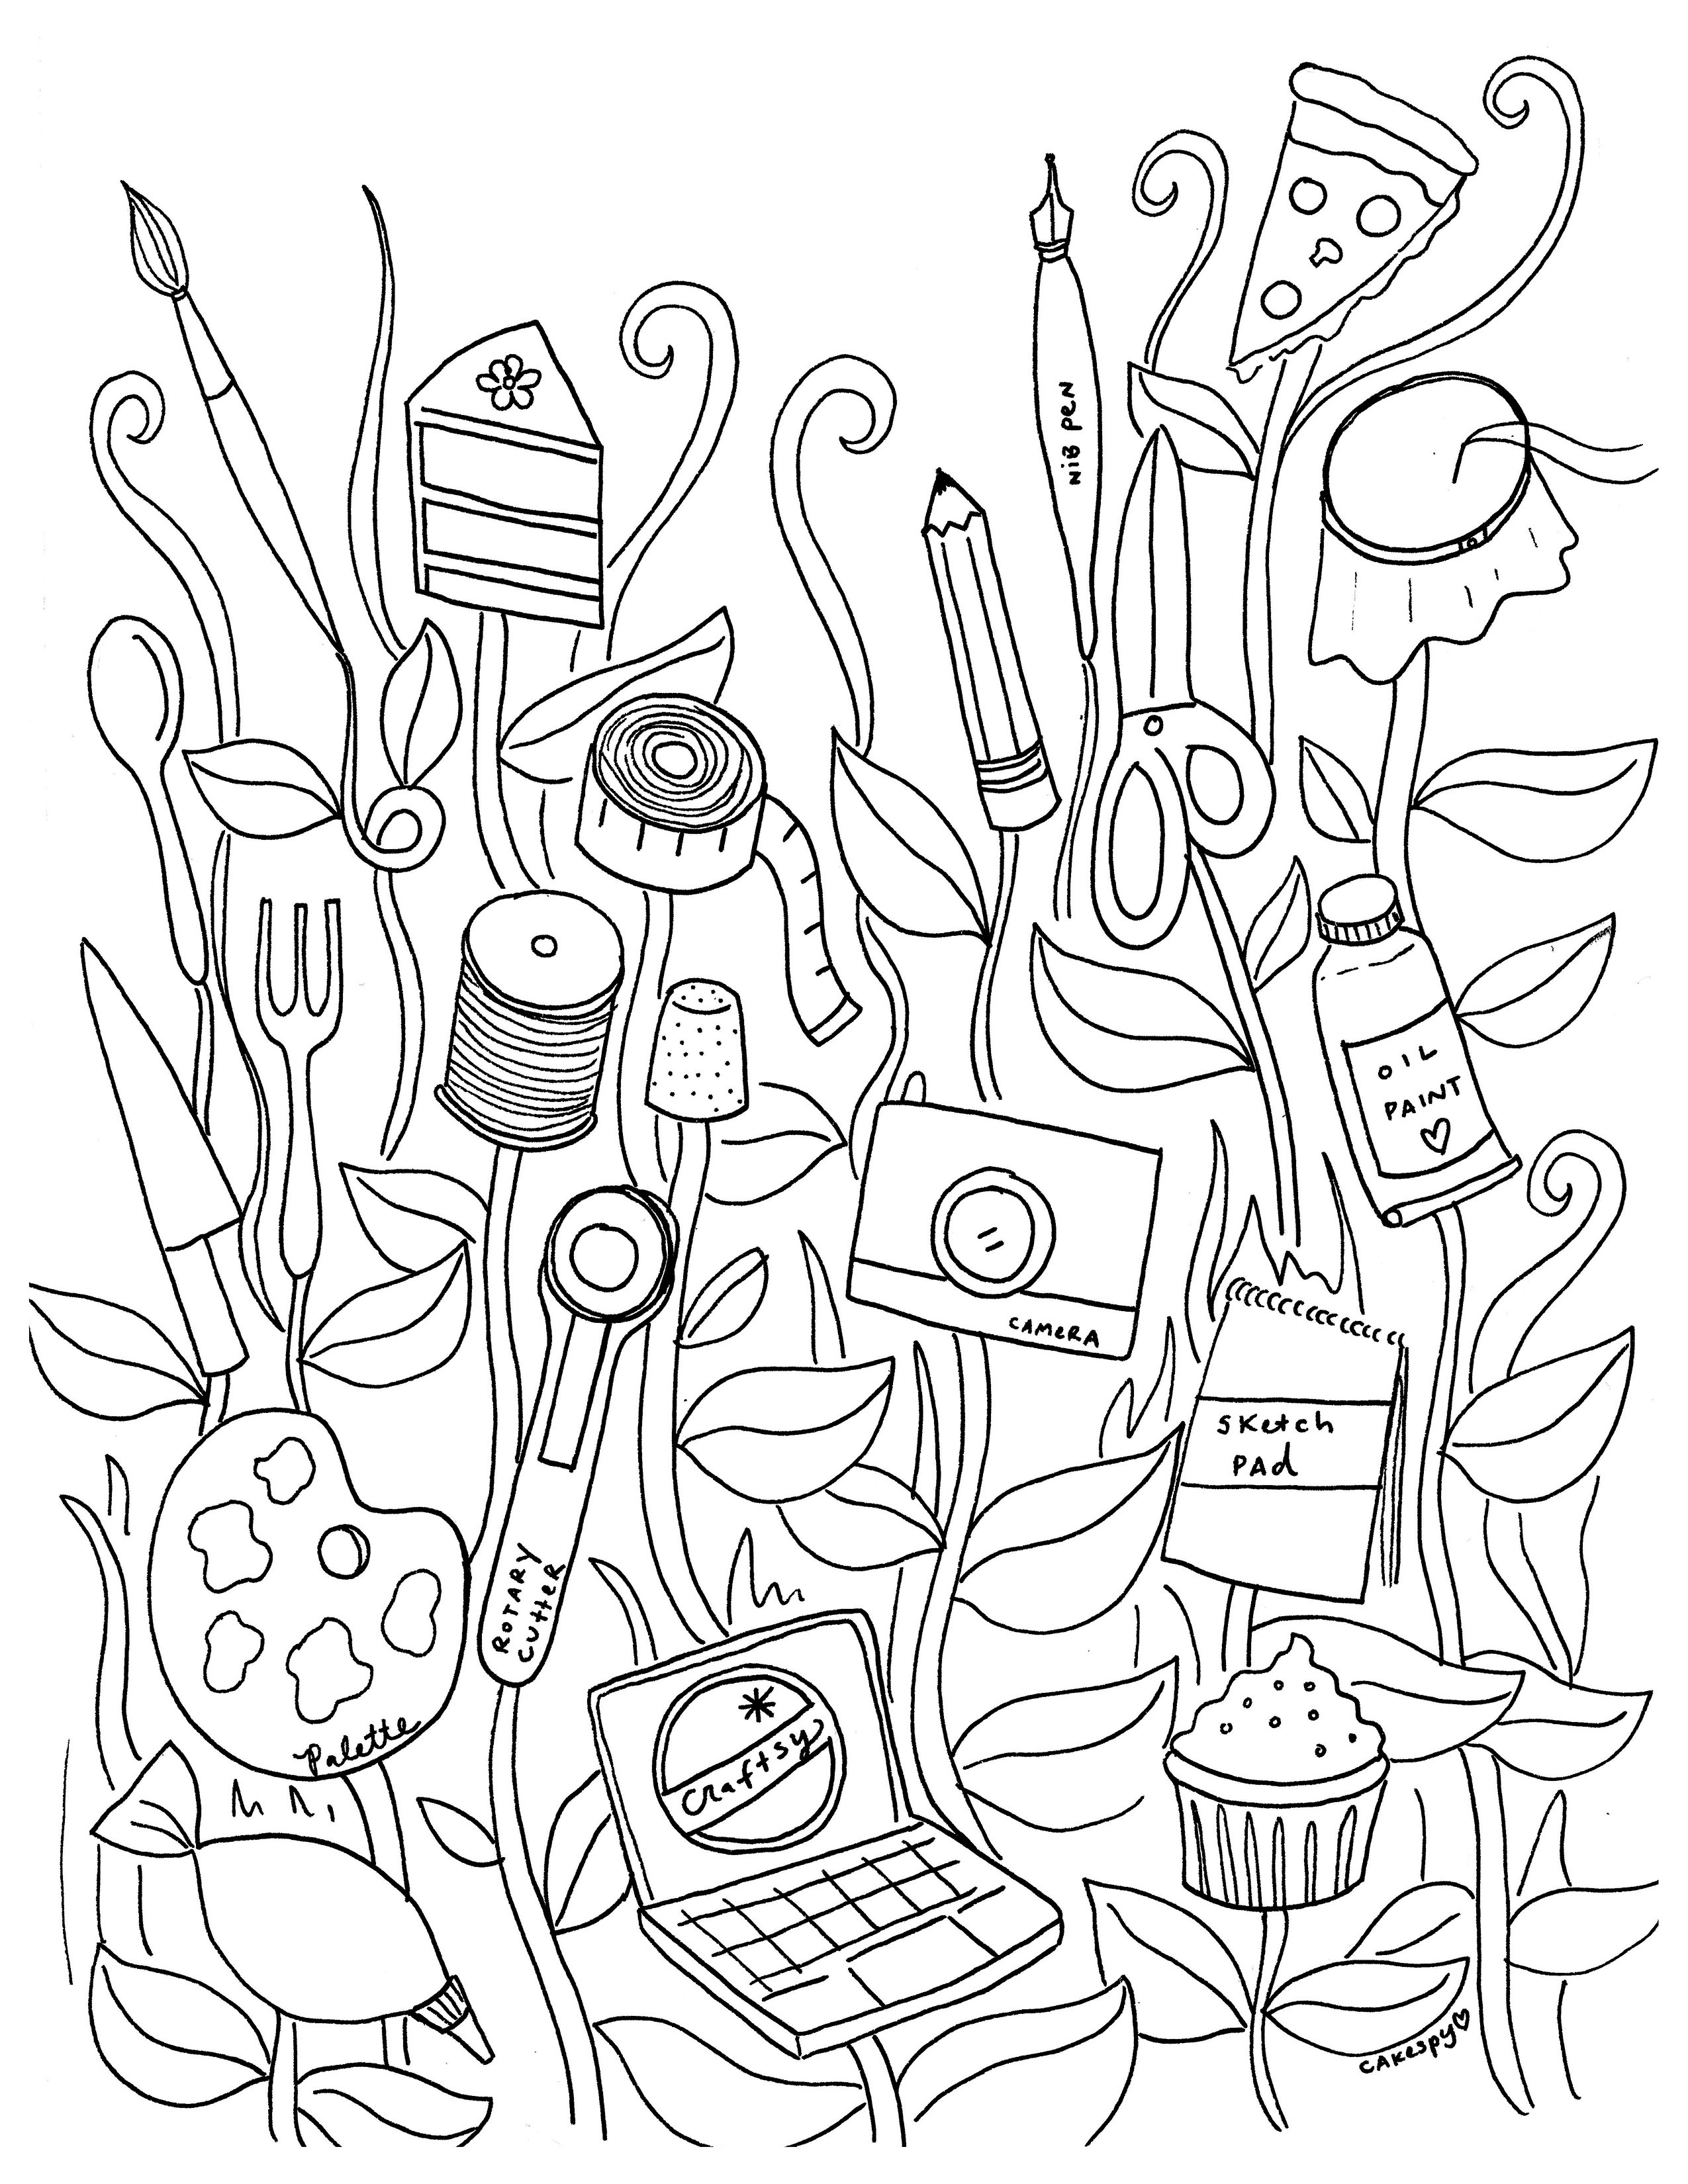 Books Coloring Pages
 Free Coloring Book Pages for Adults